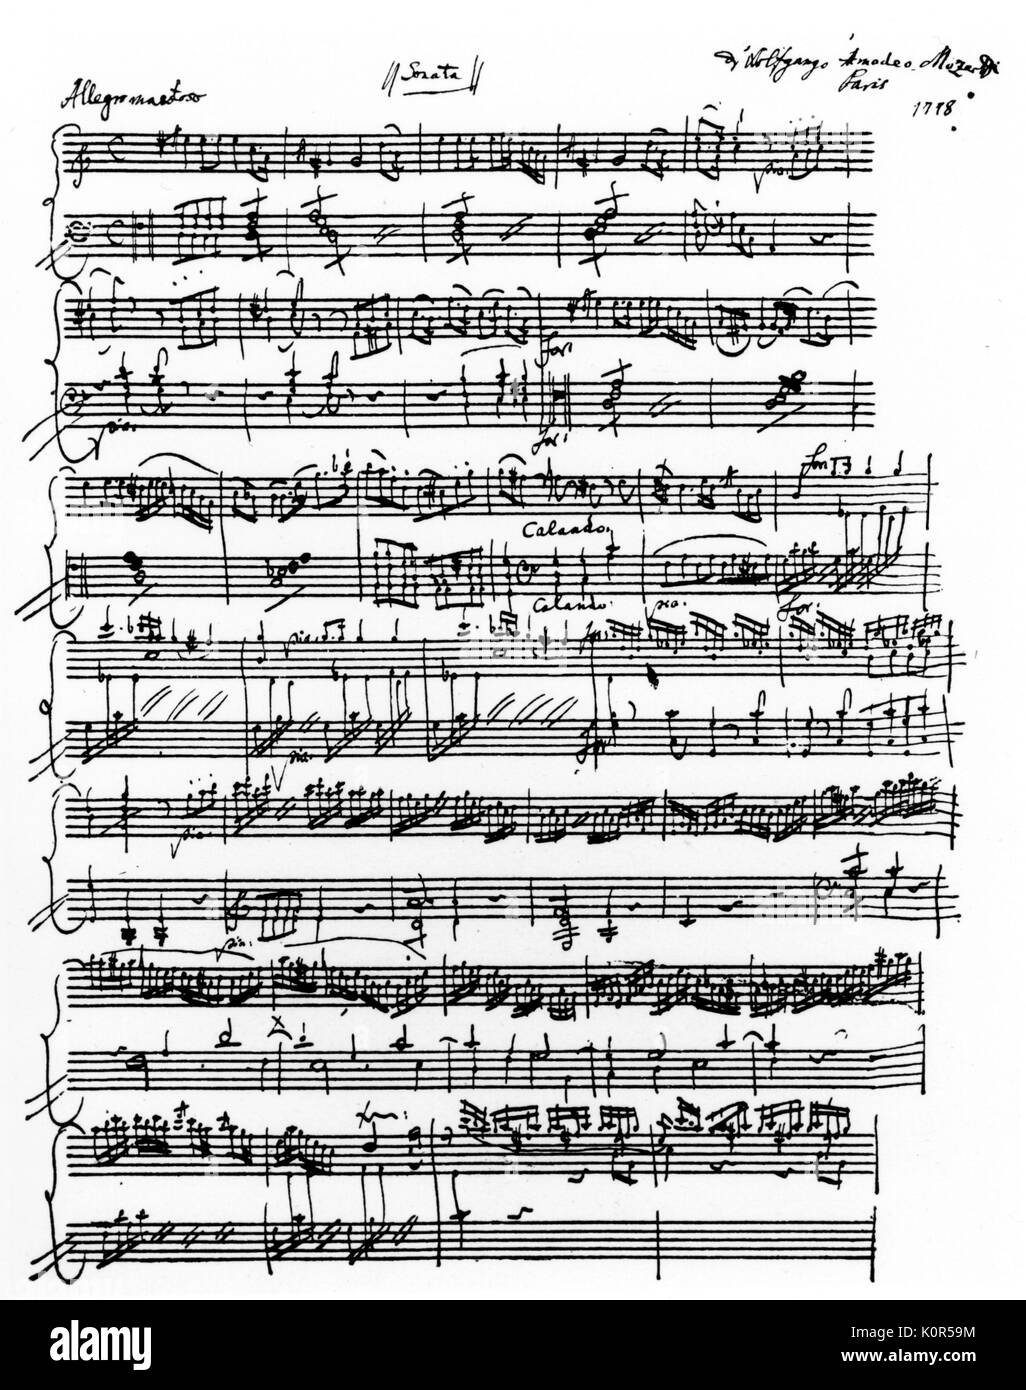 Wolfgang Amadeus Mozart - Piano Sonata in A Minor, K310 Autograph score,  Paris, 1778. Opening of first movement. Austrian composer, 27 January 1756  - 5 December 1791 Stock Photo - Alamy